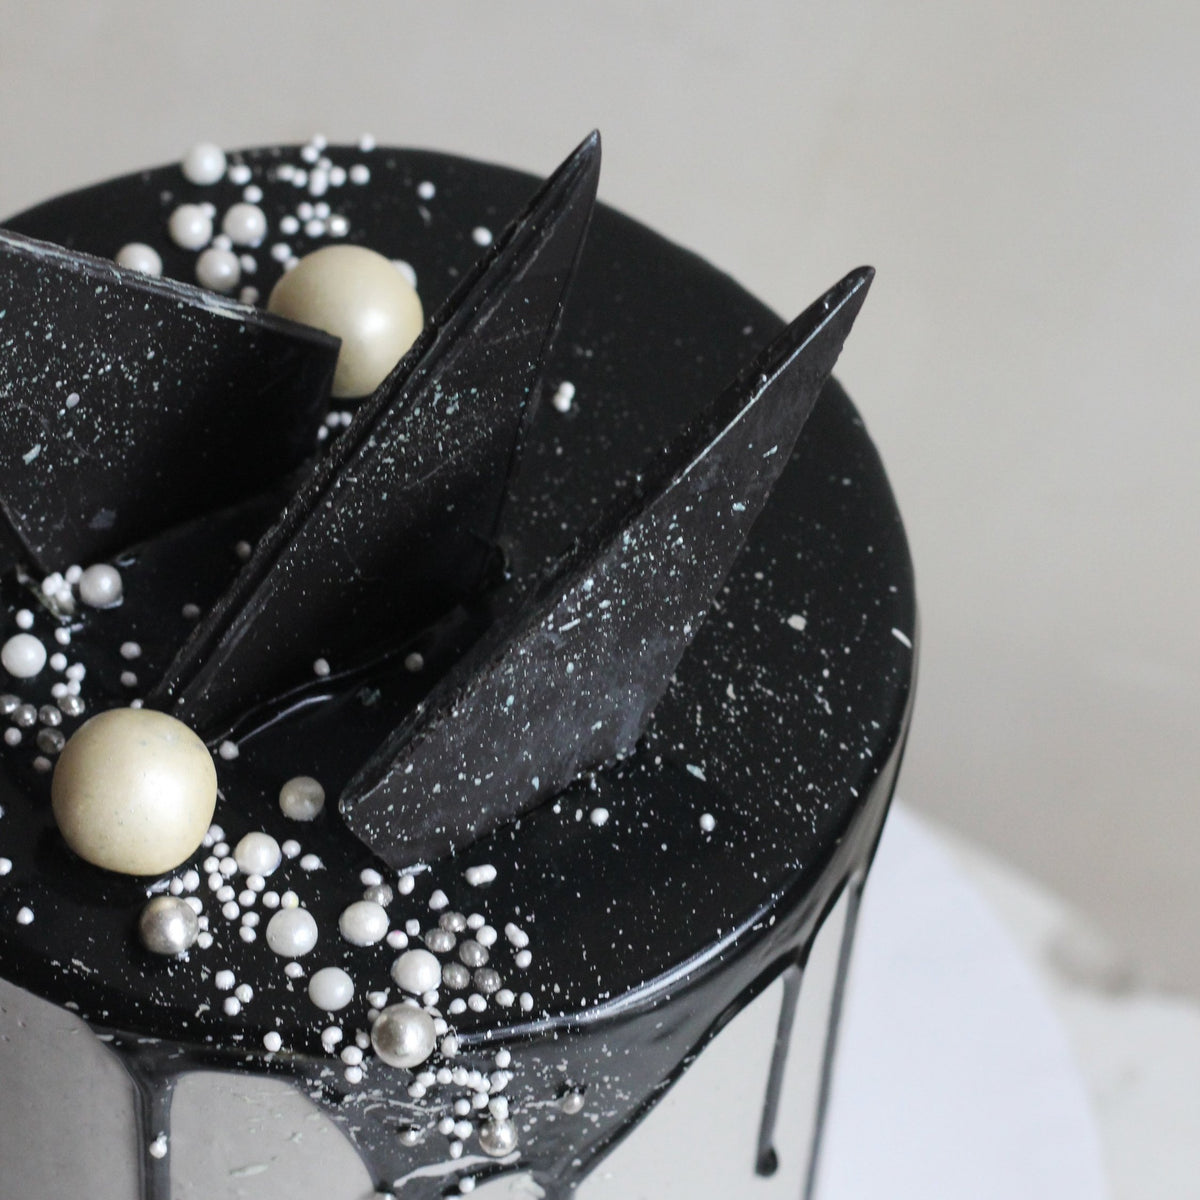 The Concrete Cake - dipped in black drip icing, with geometric chocolate forms.